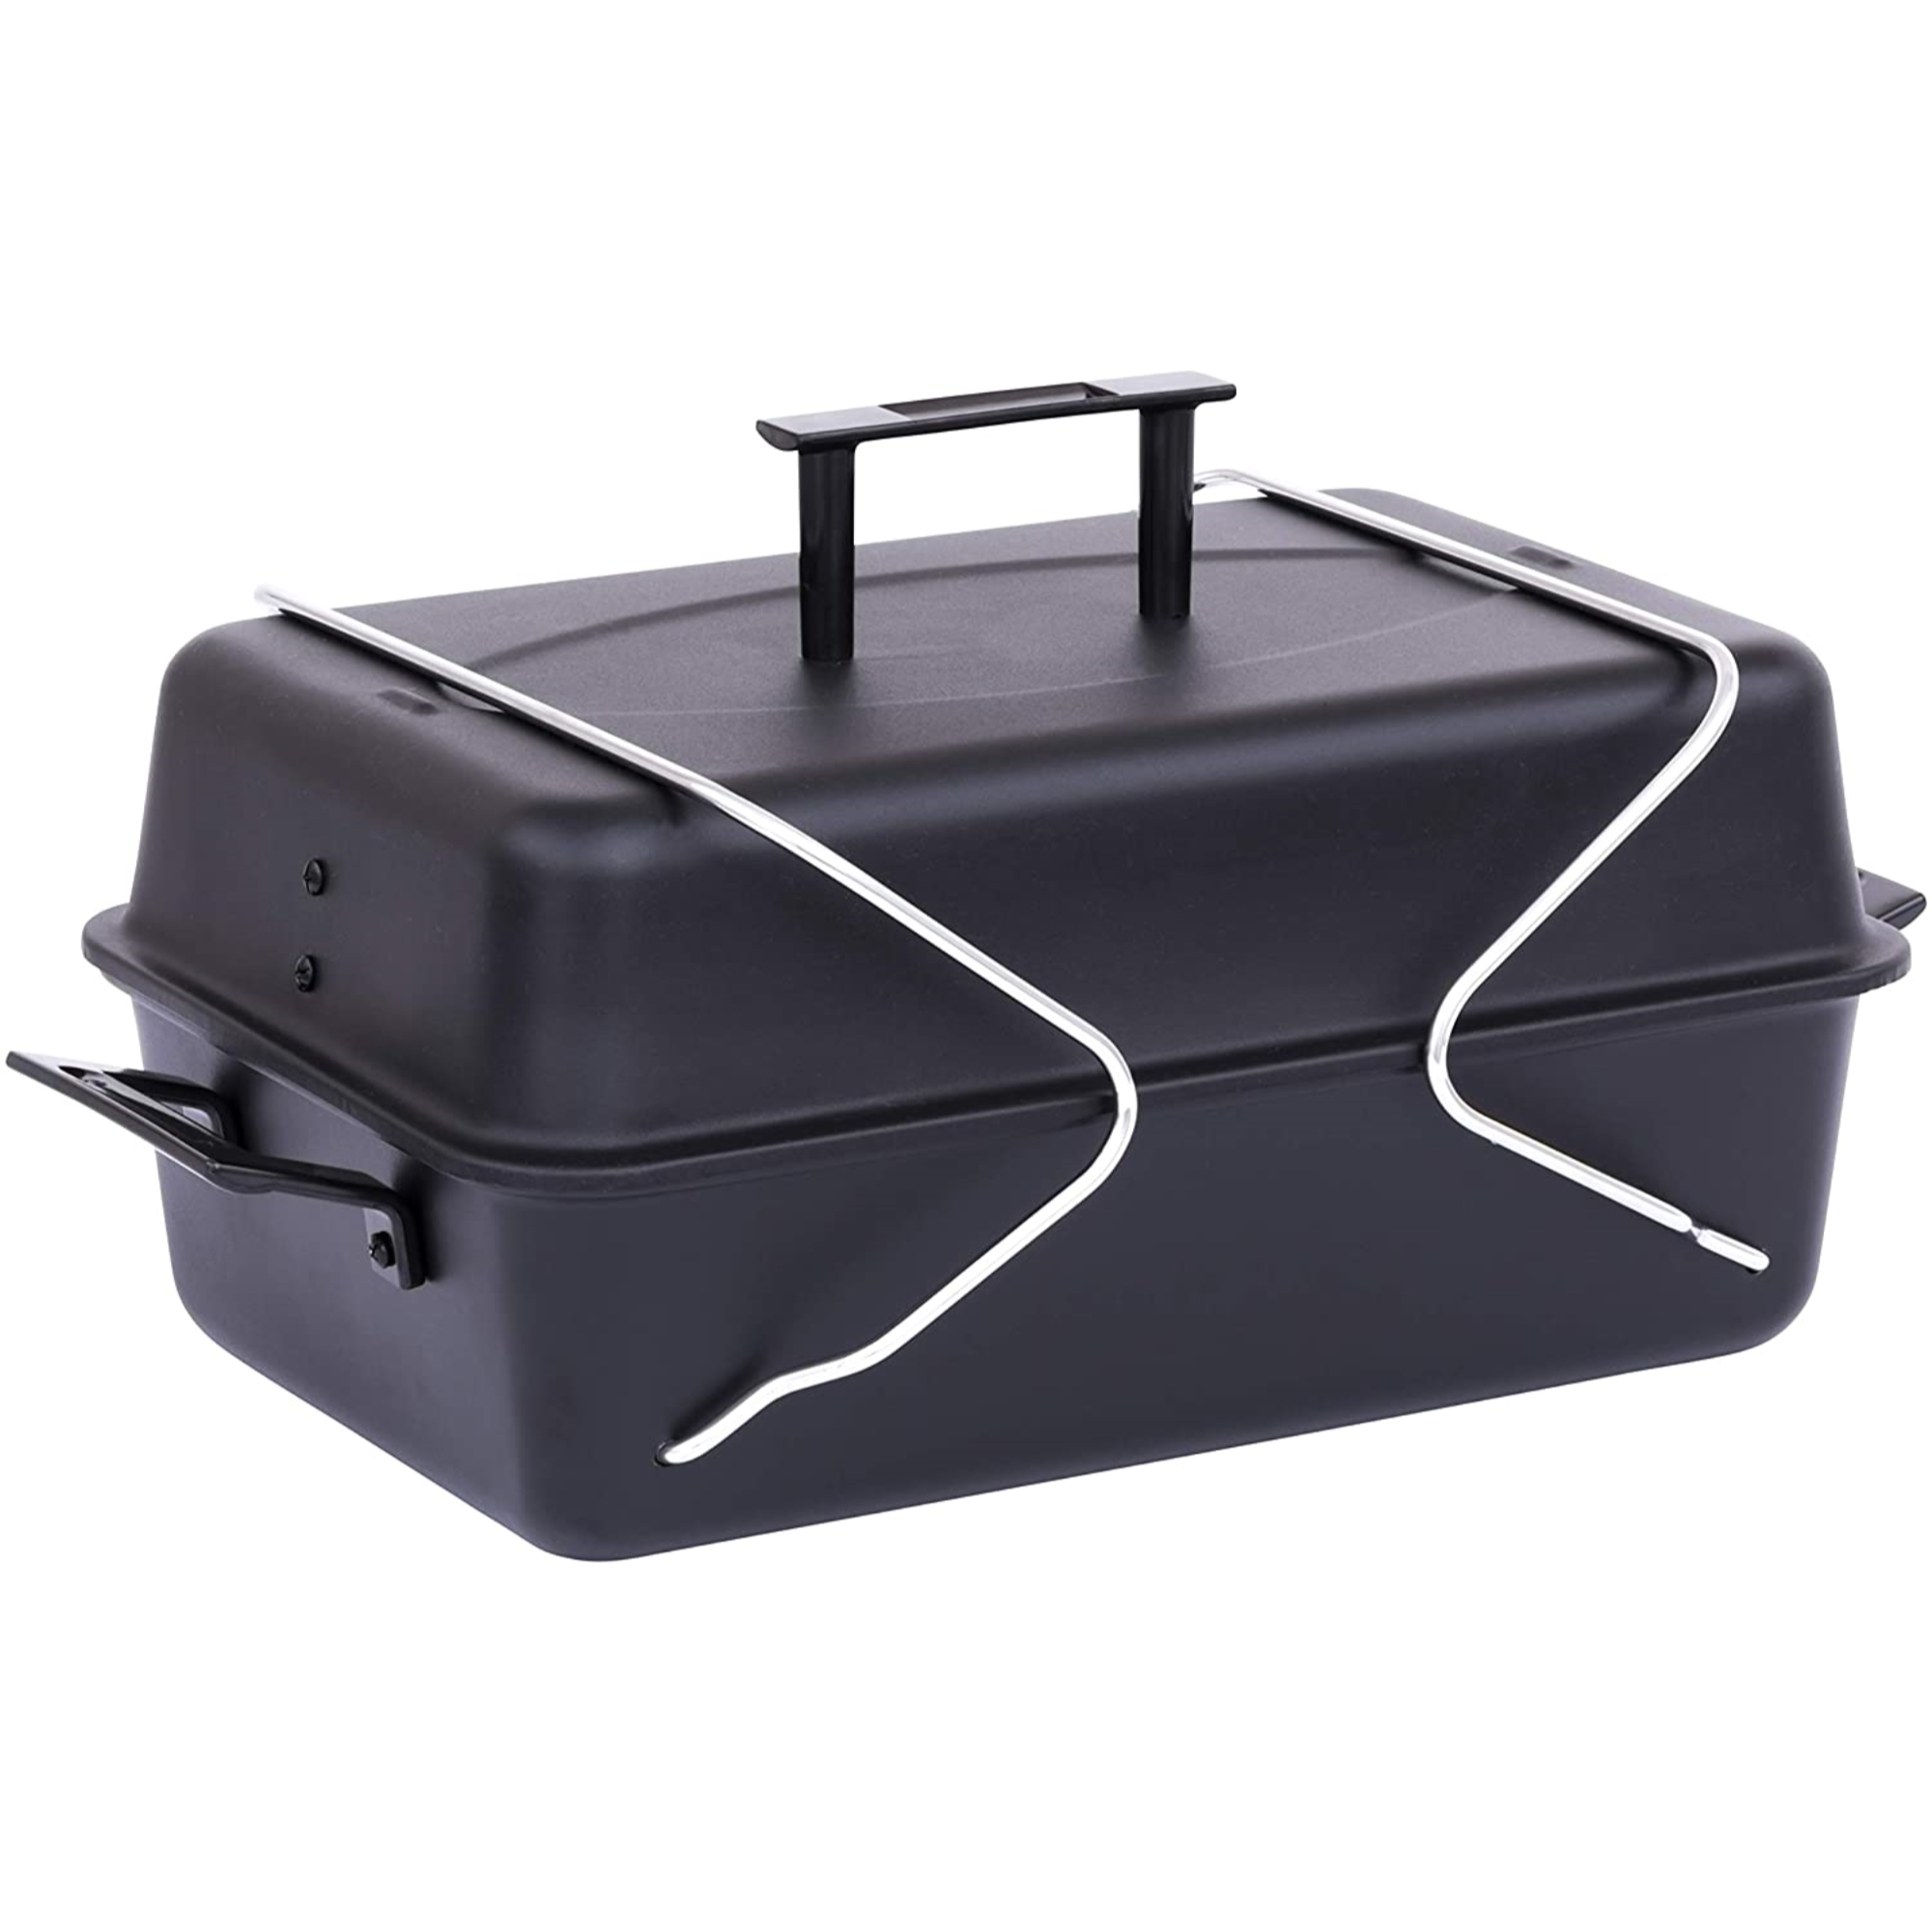 Char-Broil Portable Gas Grill - image 1 of 8